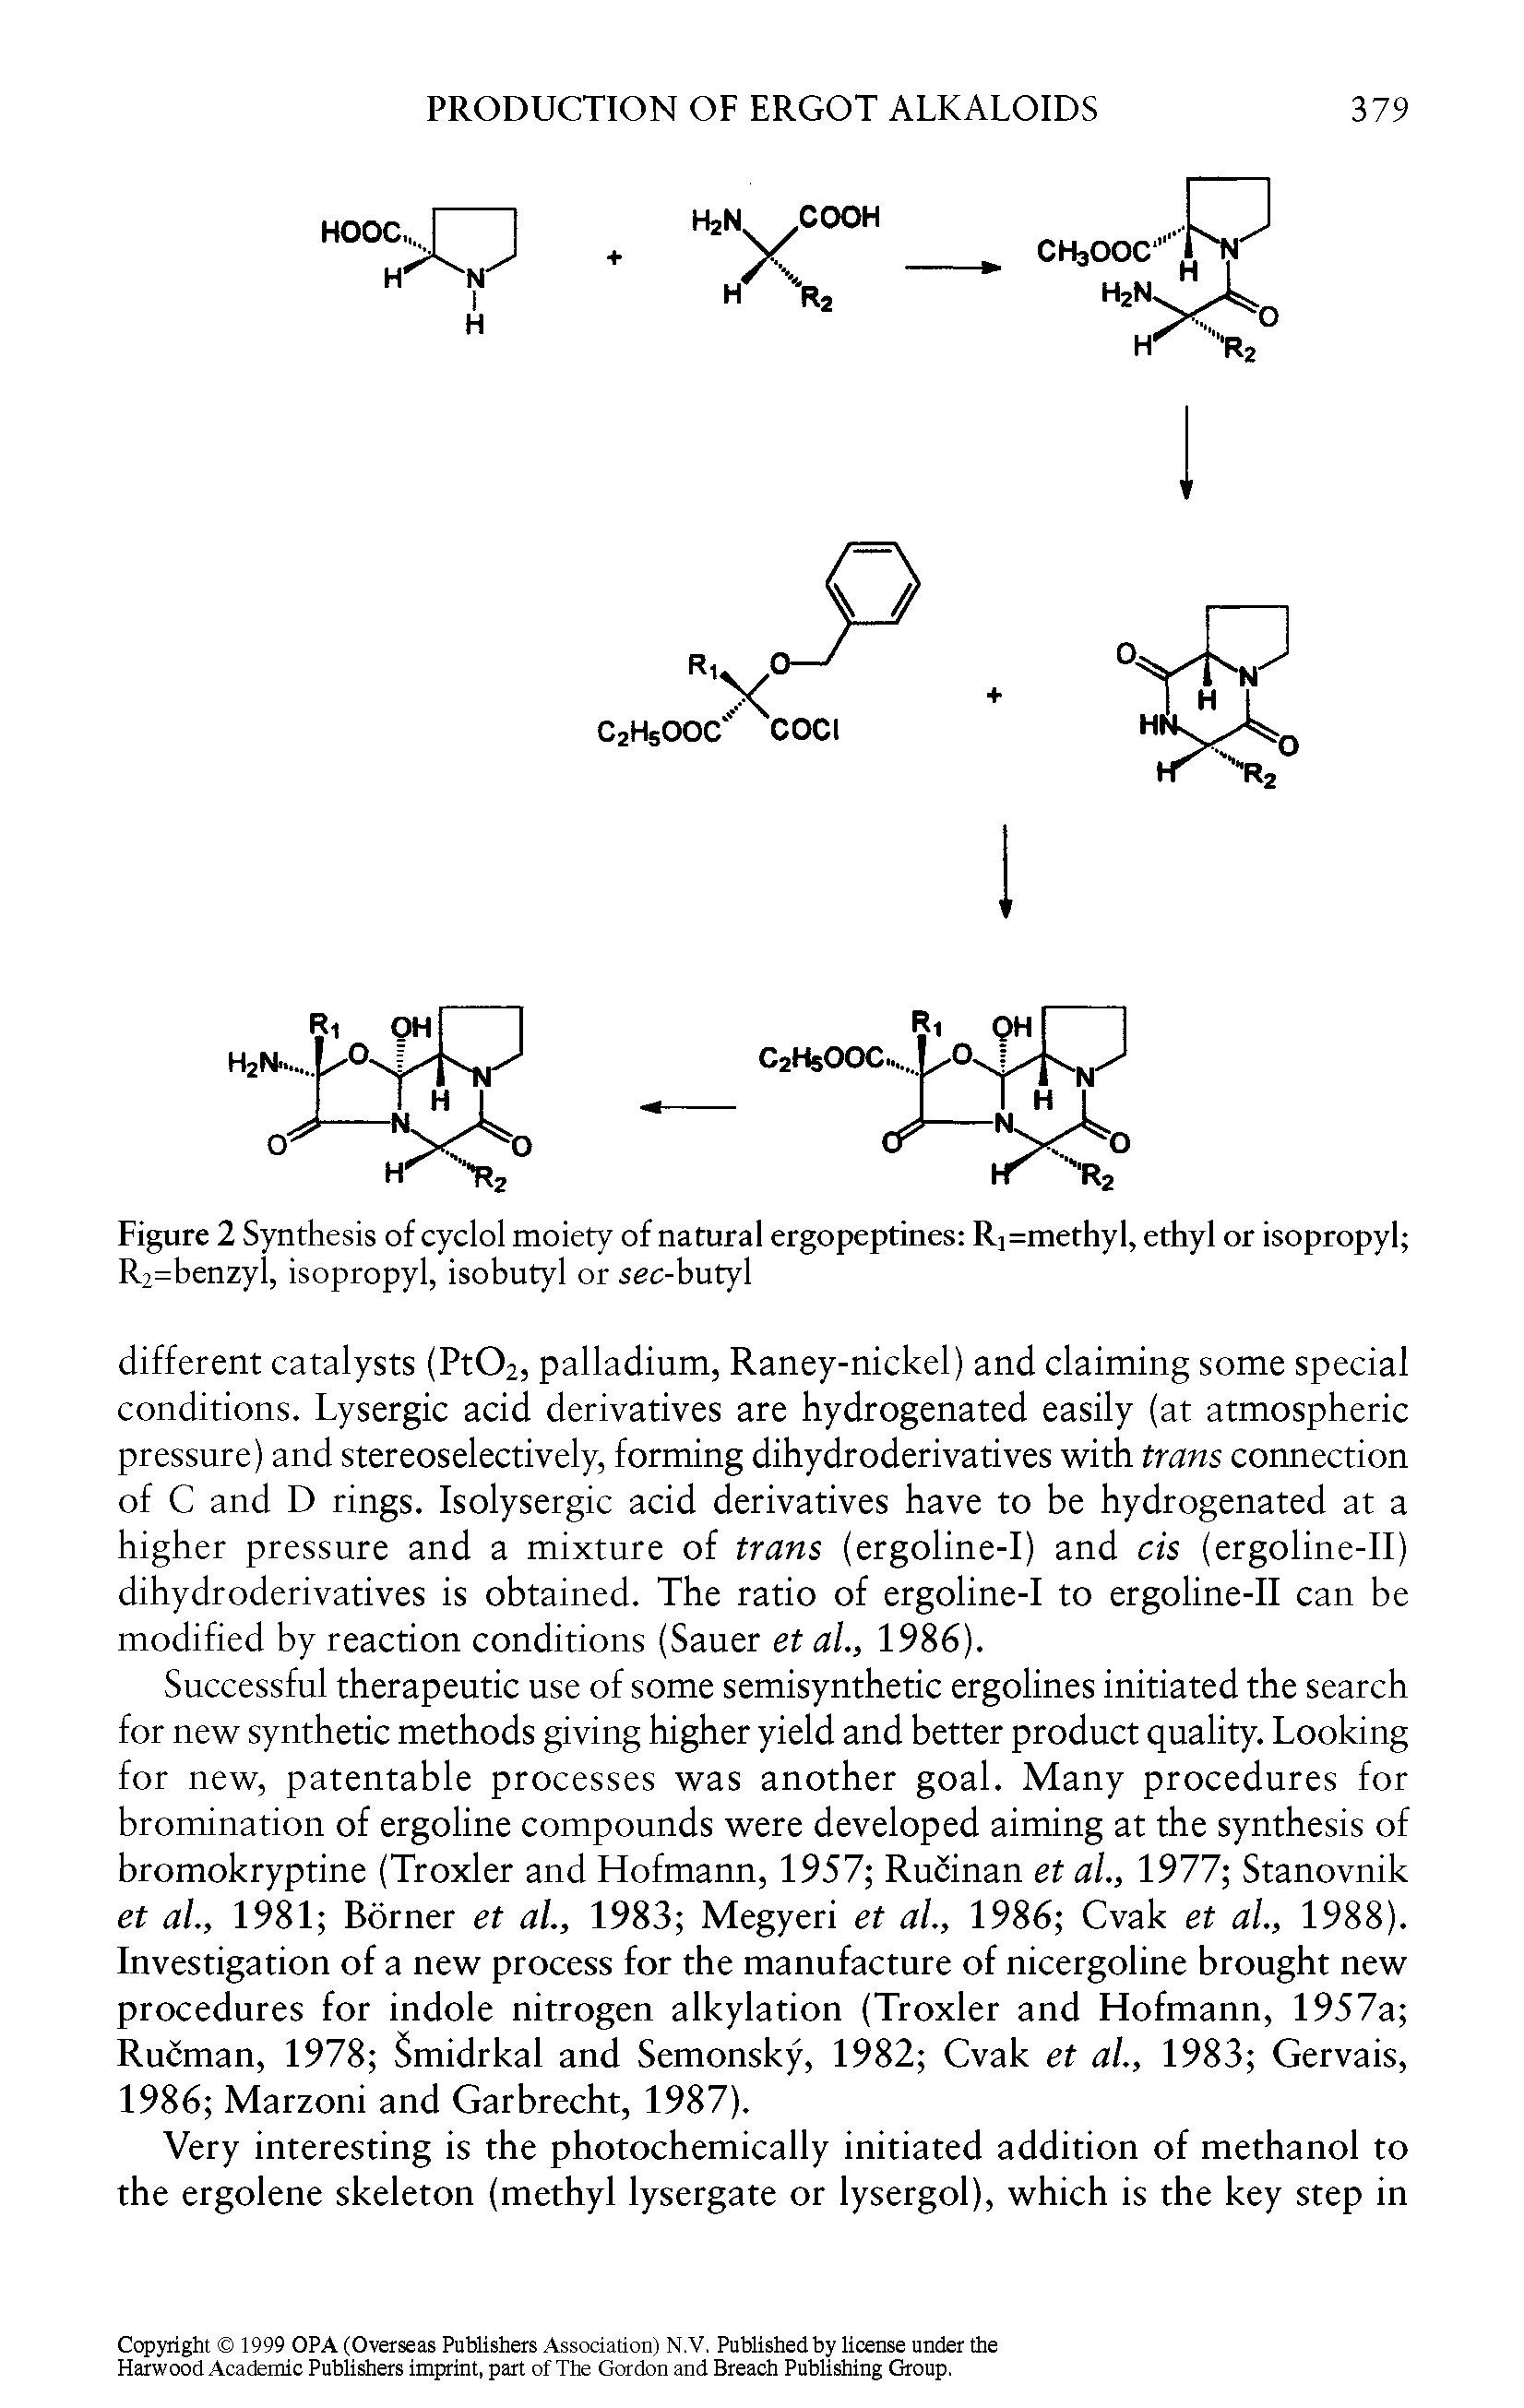 Figure 2 Synthesis of cyclol moiety of natural ergopeptines R]=methyl, ethyl or isopropyl R2=benzyl, isopropyl, isohutyl or sec-butyl...